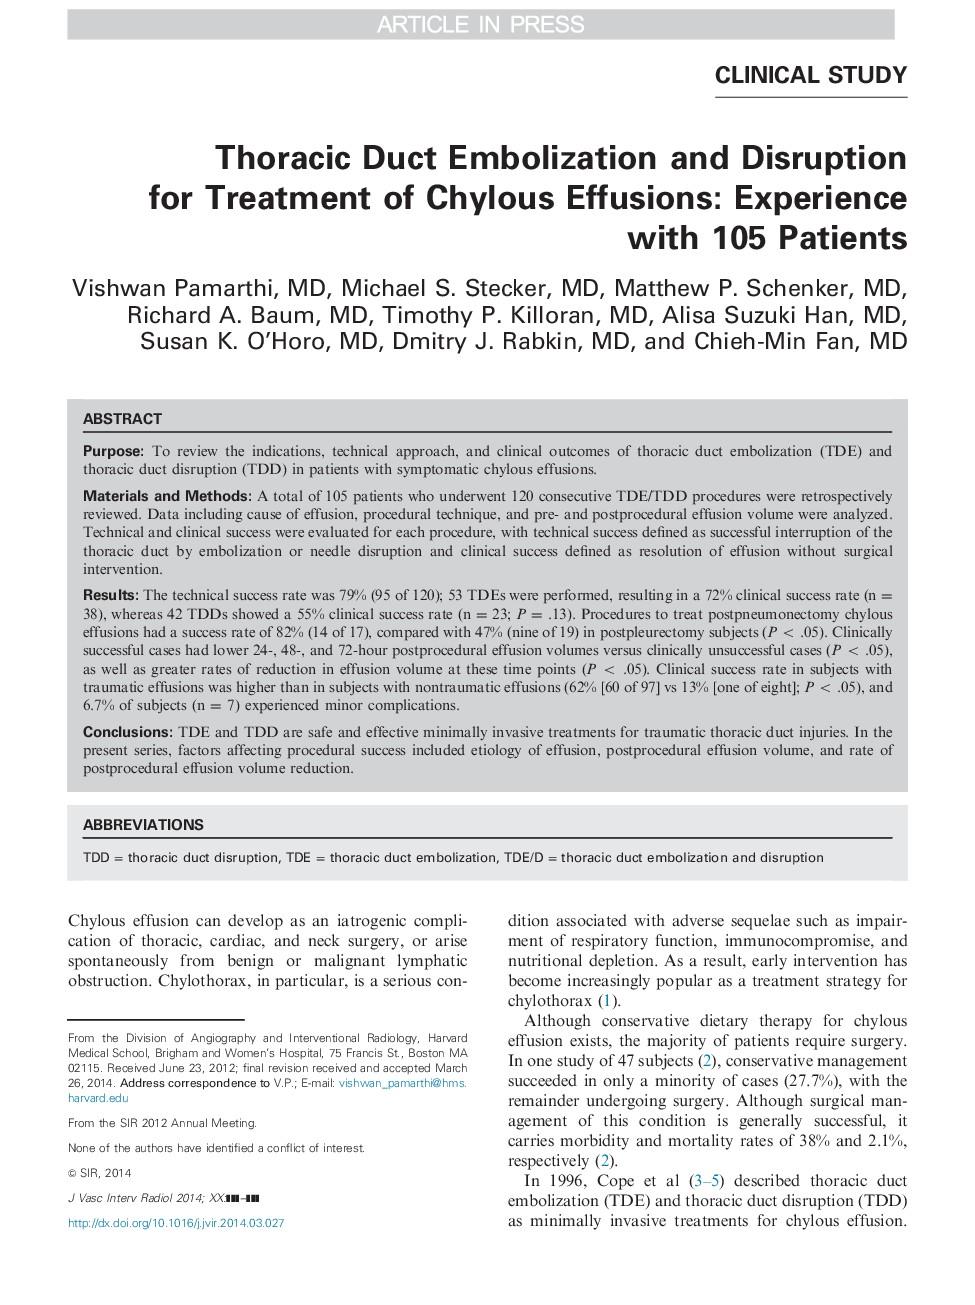 Thoracic Duct Embolization and Disruption for Treatment of Chylous Effusions: Experience with 105 Patients